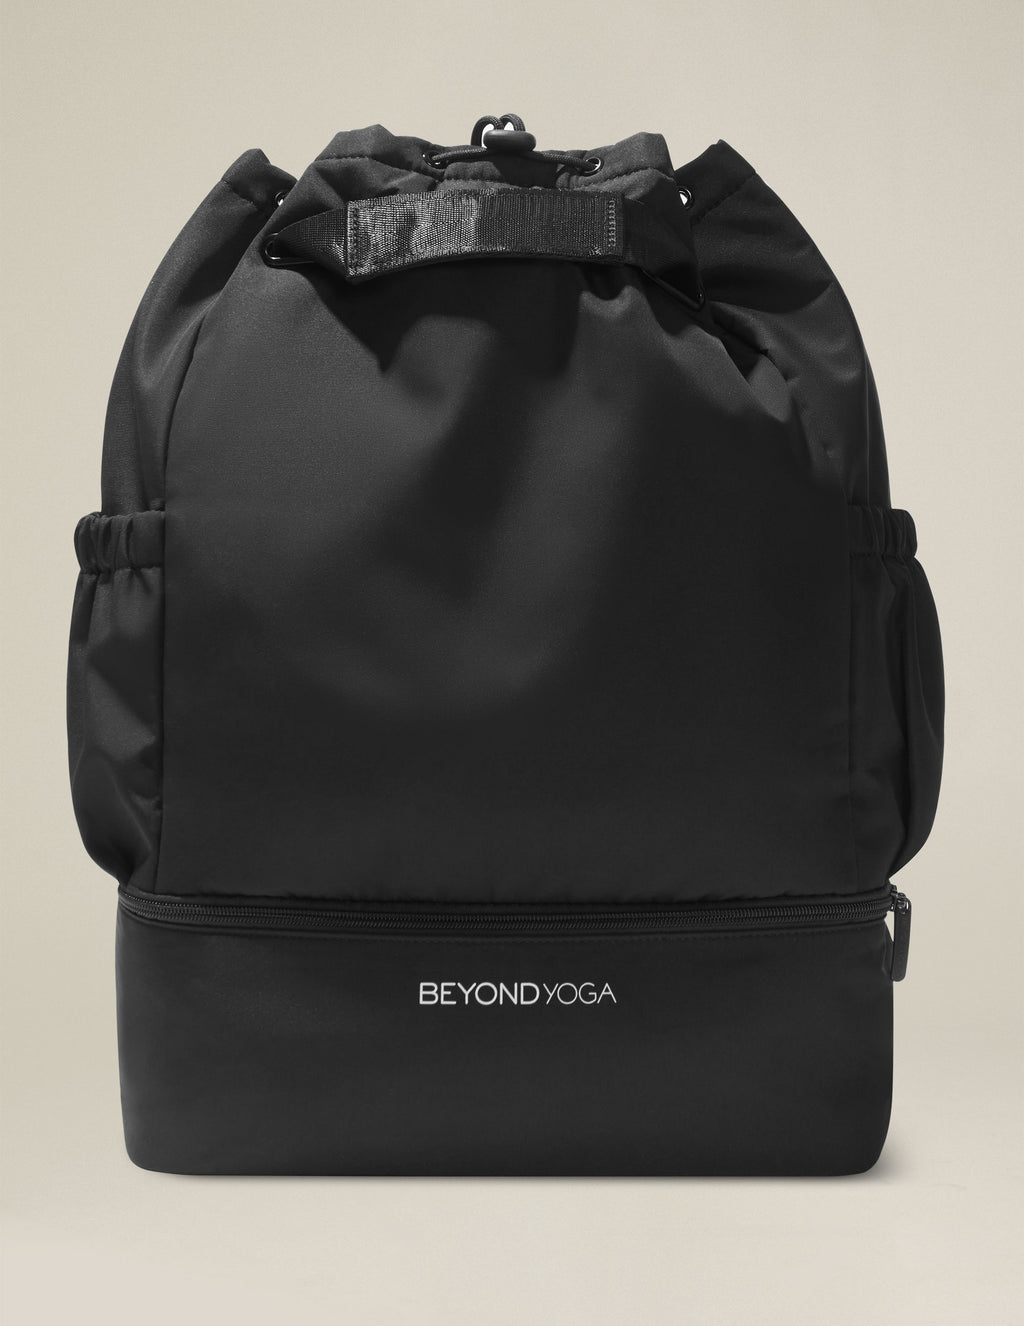 Convertible Gym Bag Featured Image